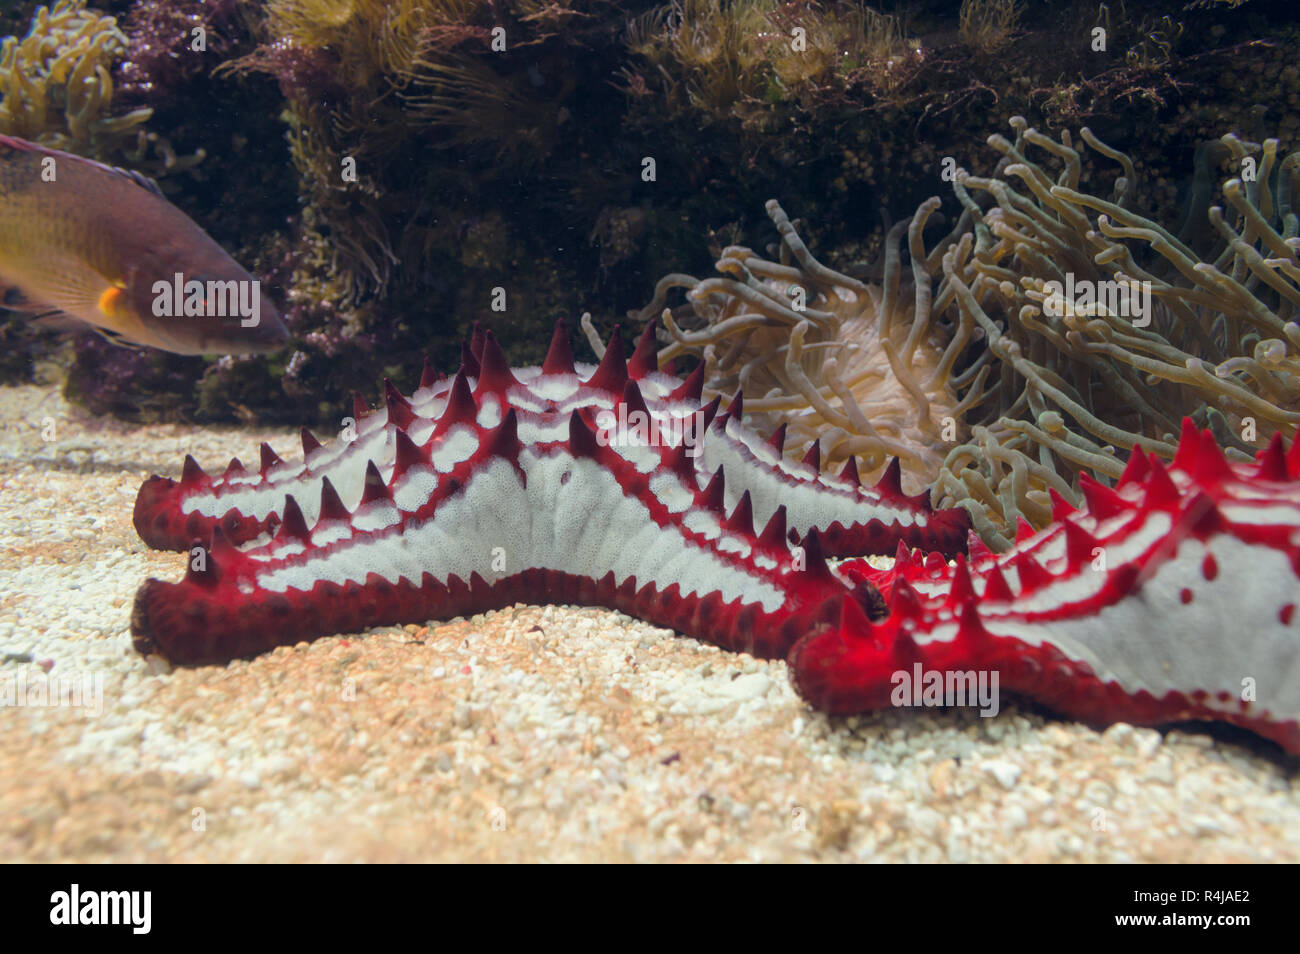 close up view of red-knobbed starfishes with sea anemones and fish on background Stock Photo